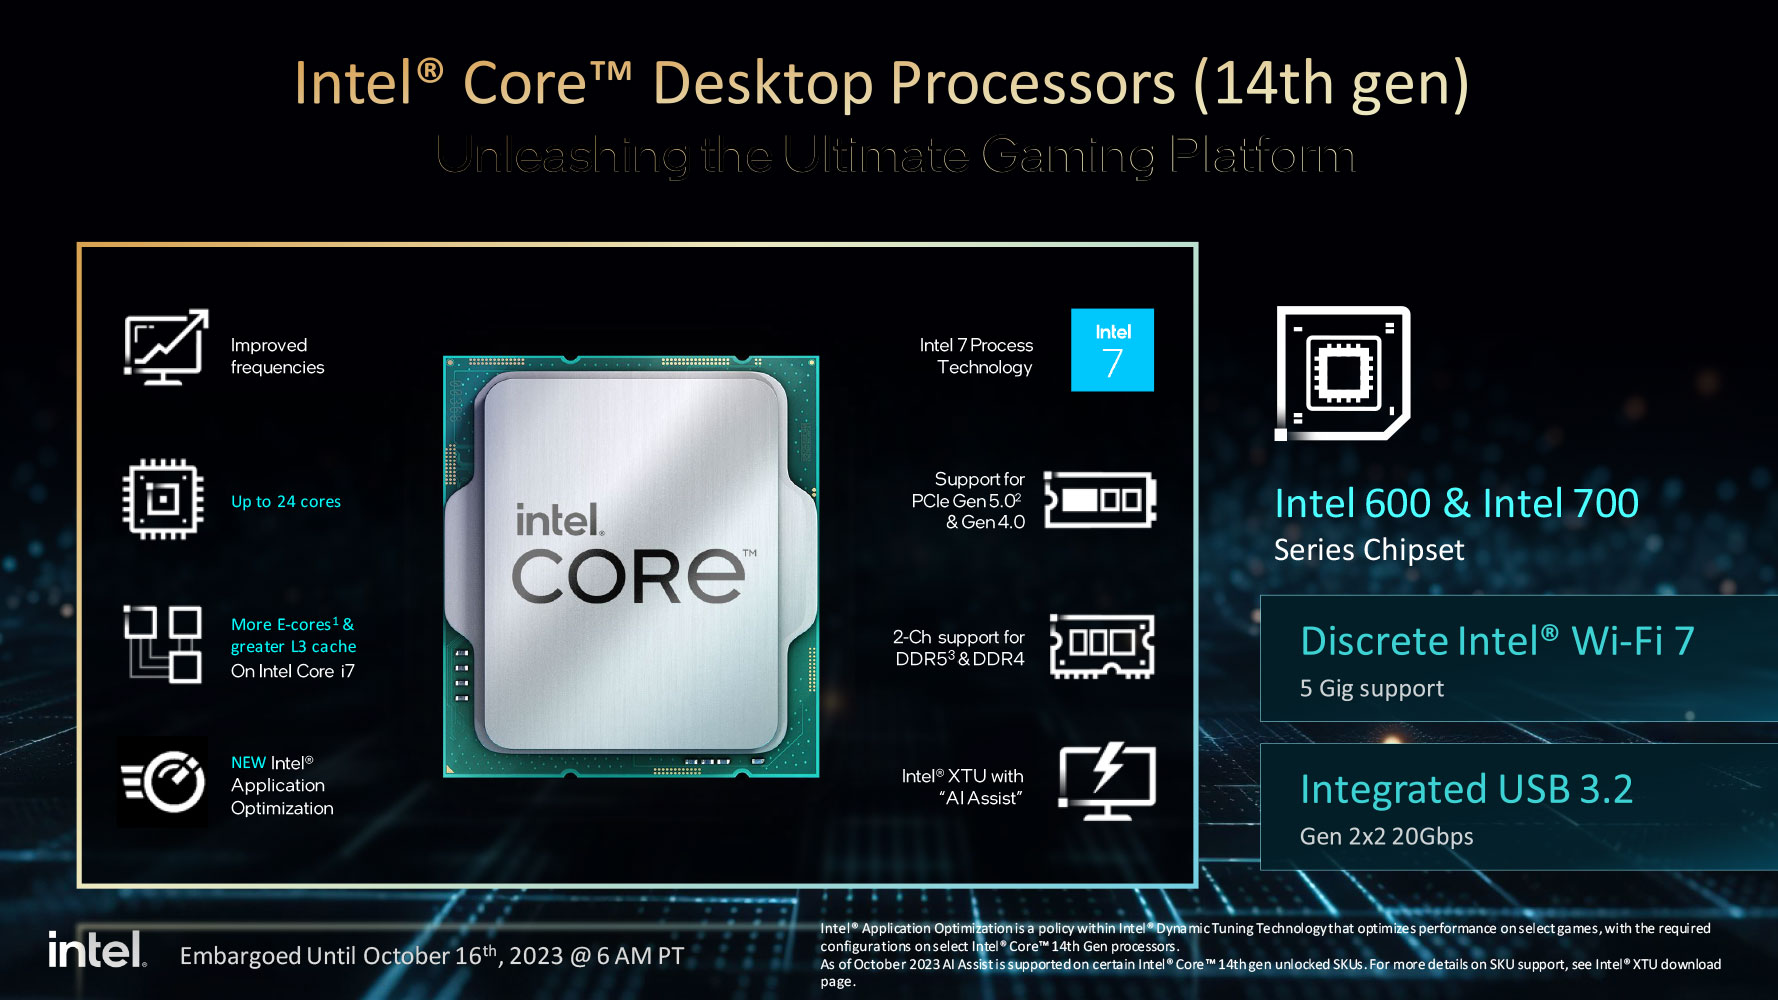 Intel Core i7-14700K Review - Catching the 13900K - Architecture